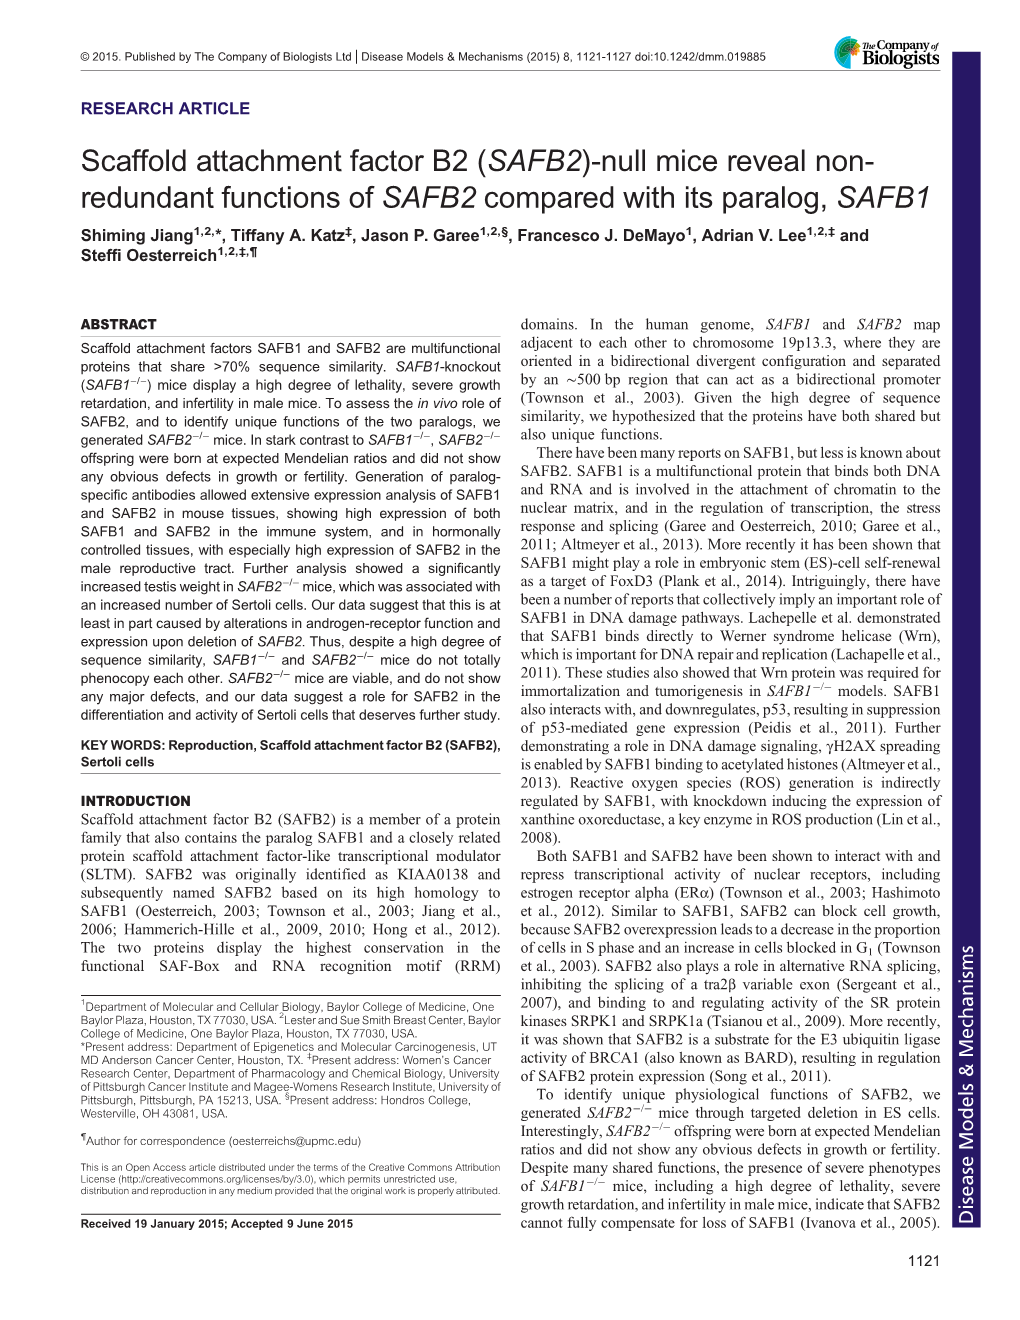 SAFB2)-Null Mice Reveal Non- Redundant Functions of SAFB2 Compared with Its Paralog, SAFB1 Shiming Jiang1,2,*, Tiffany A